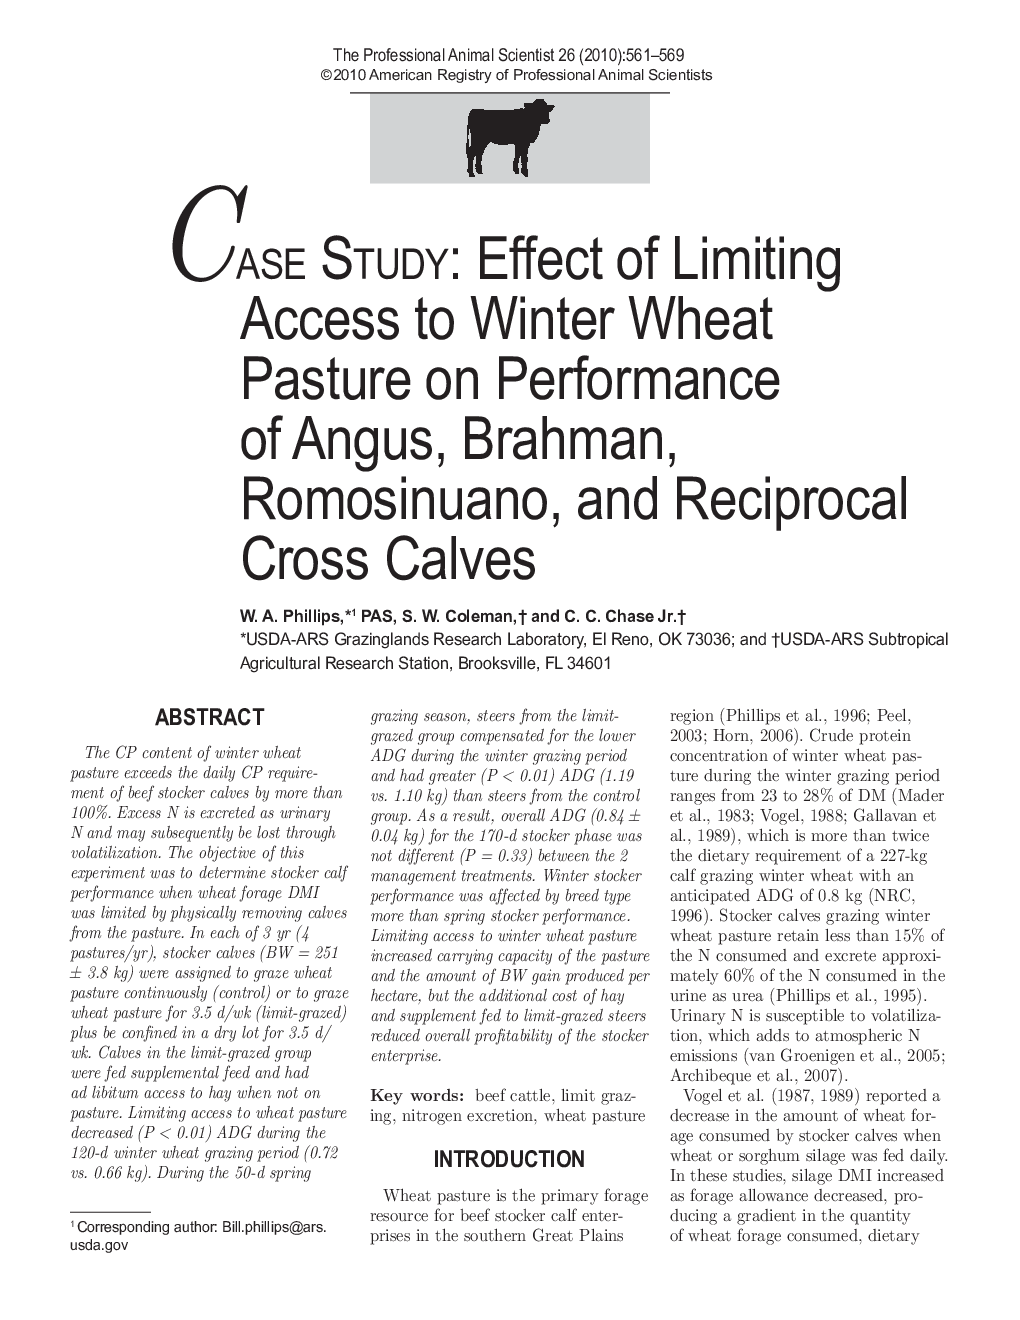 CASE Study : Effect of Limiting Access to Winter Wheat Pasture on Performance of Angus, Brahman, Romosinuano, and Reciprocal Cross Calves